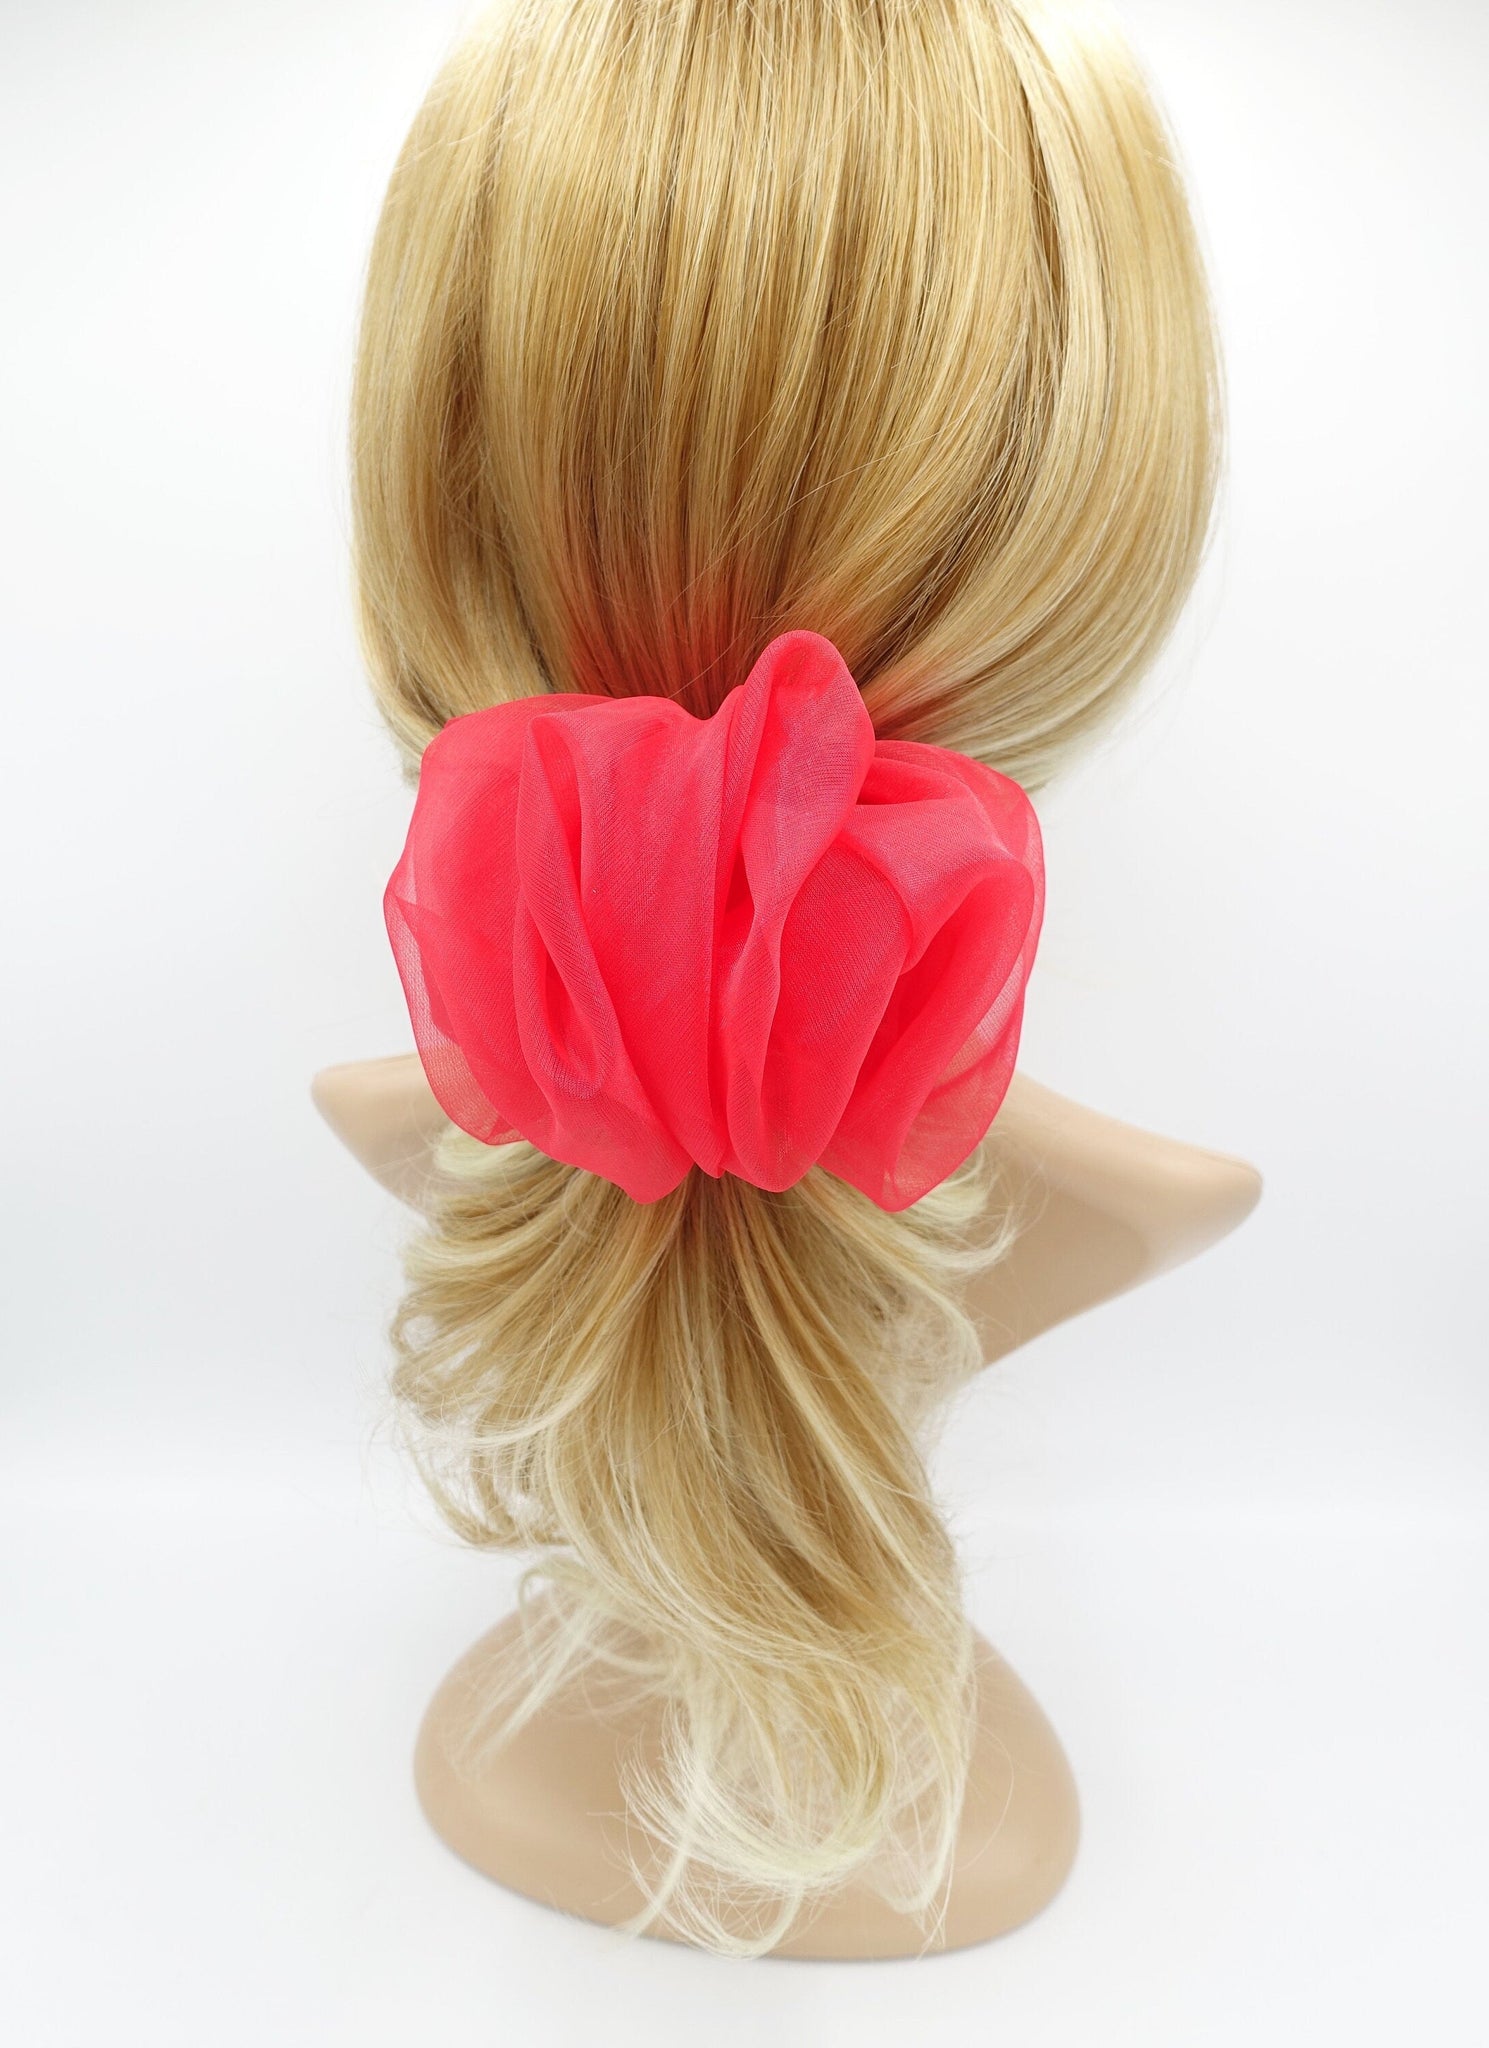 veryshine.com Barrette (Bow) Red solid mesh scrunchies hair barrette pleated wave women hair accessories